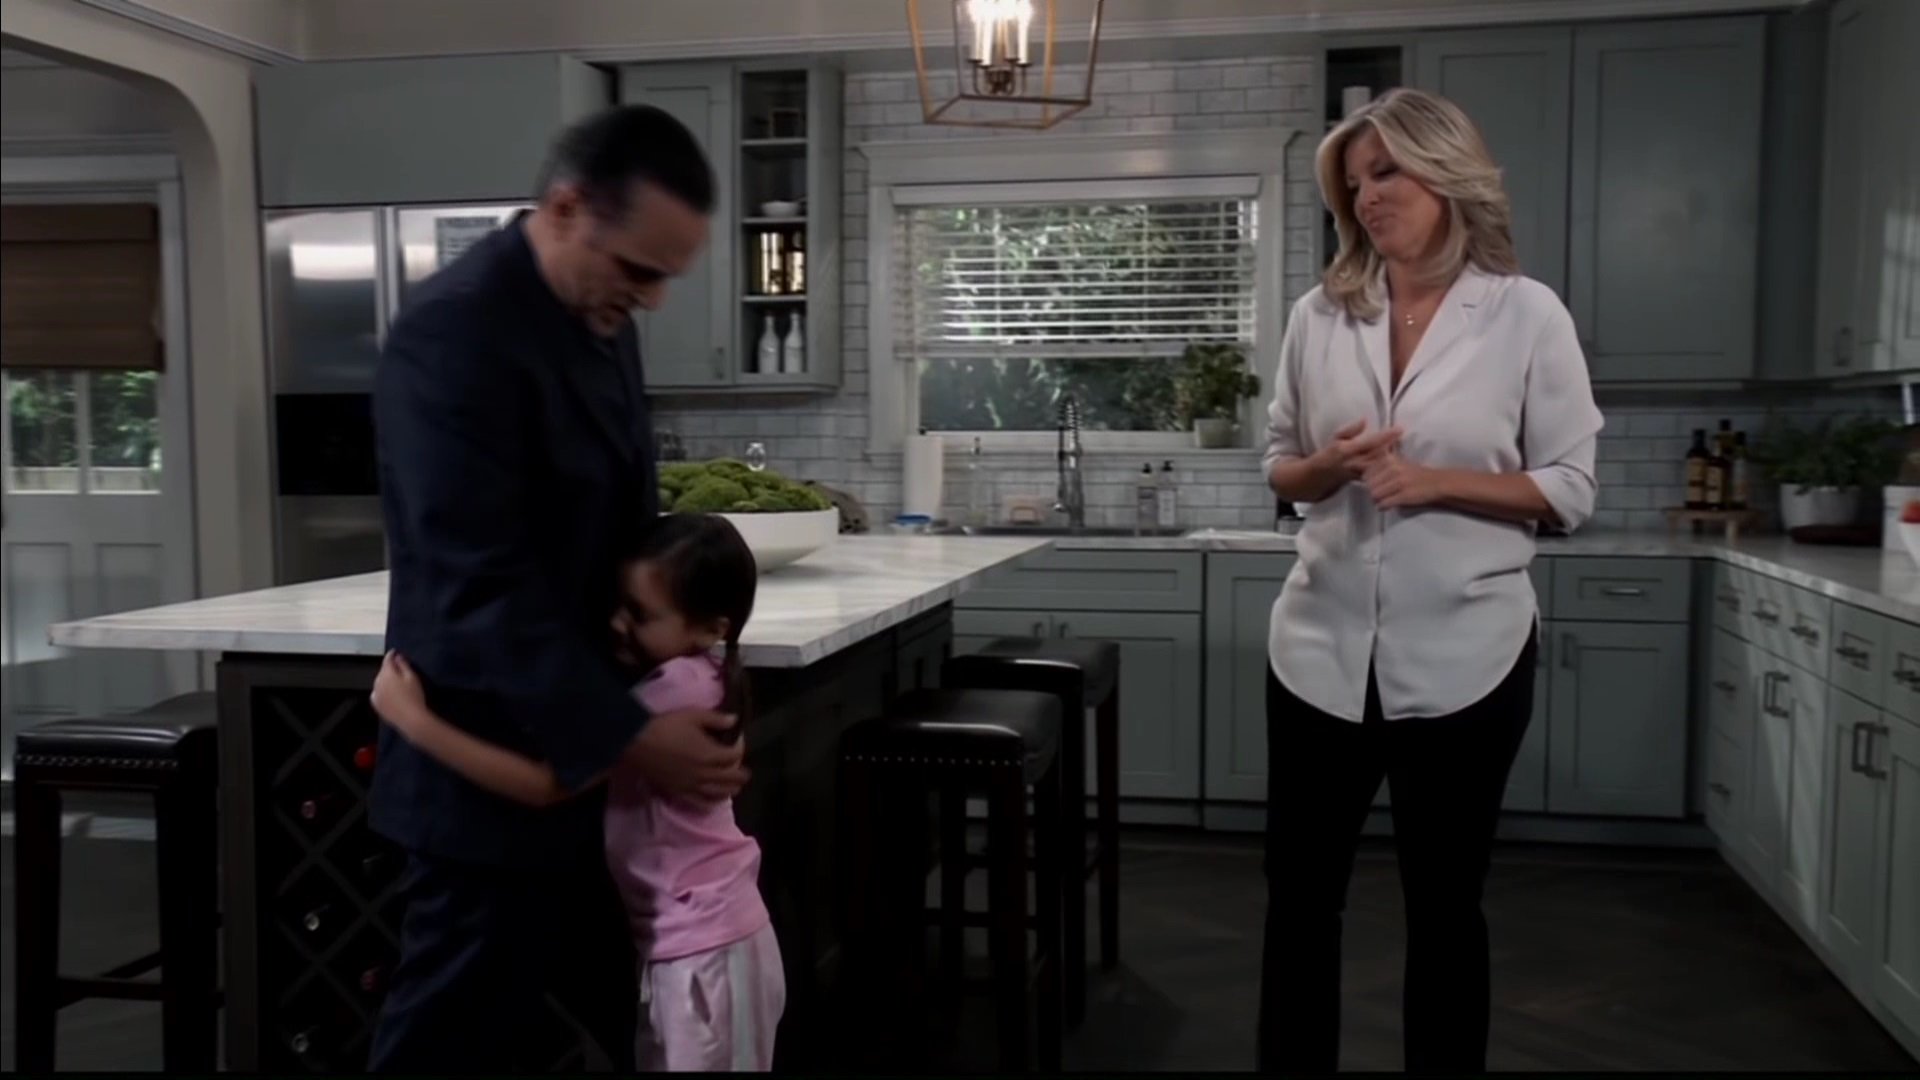 sonny greets his kid donna as carly looks on.